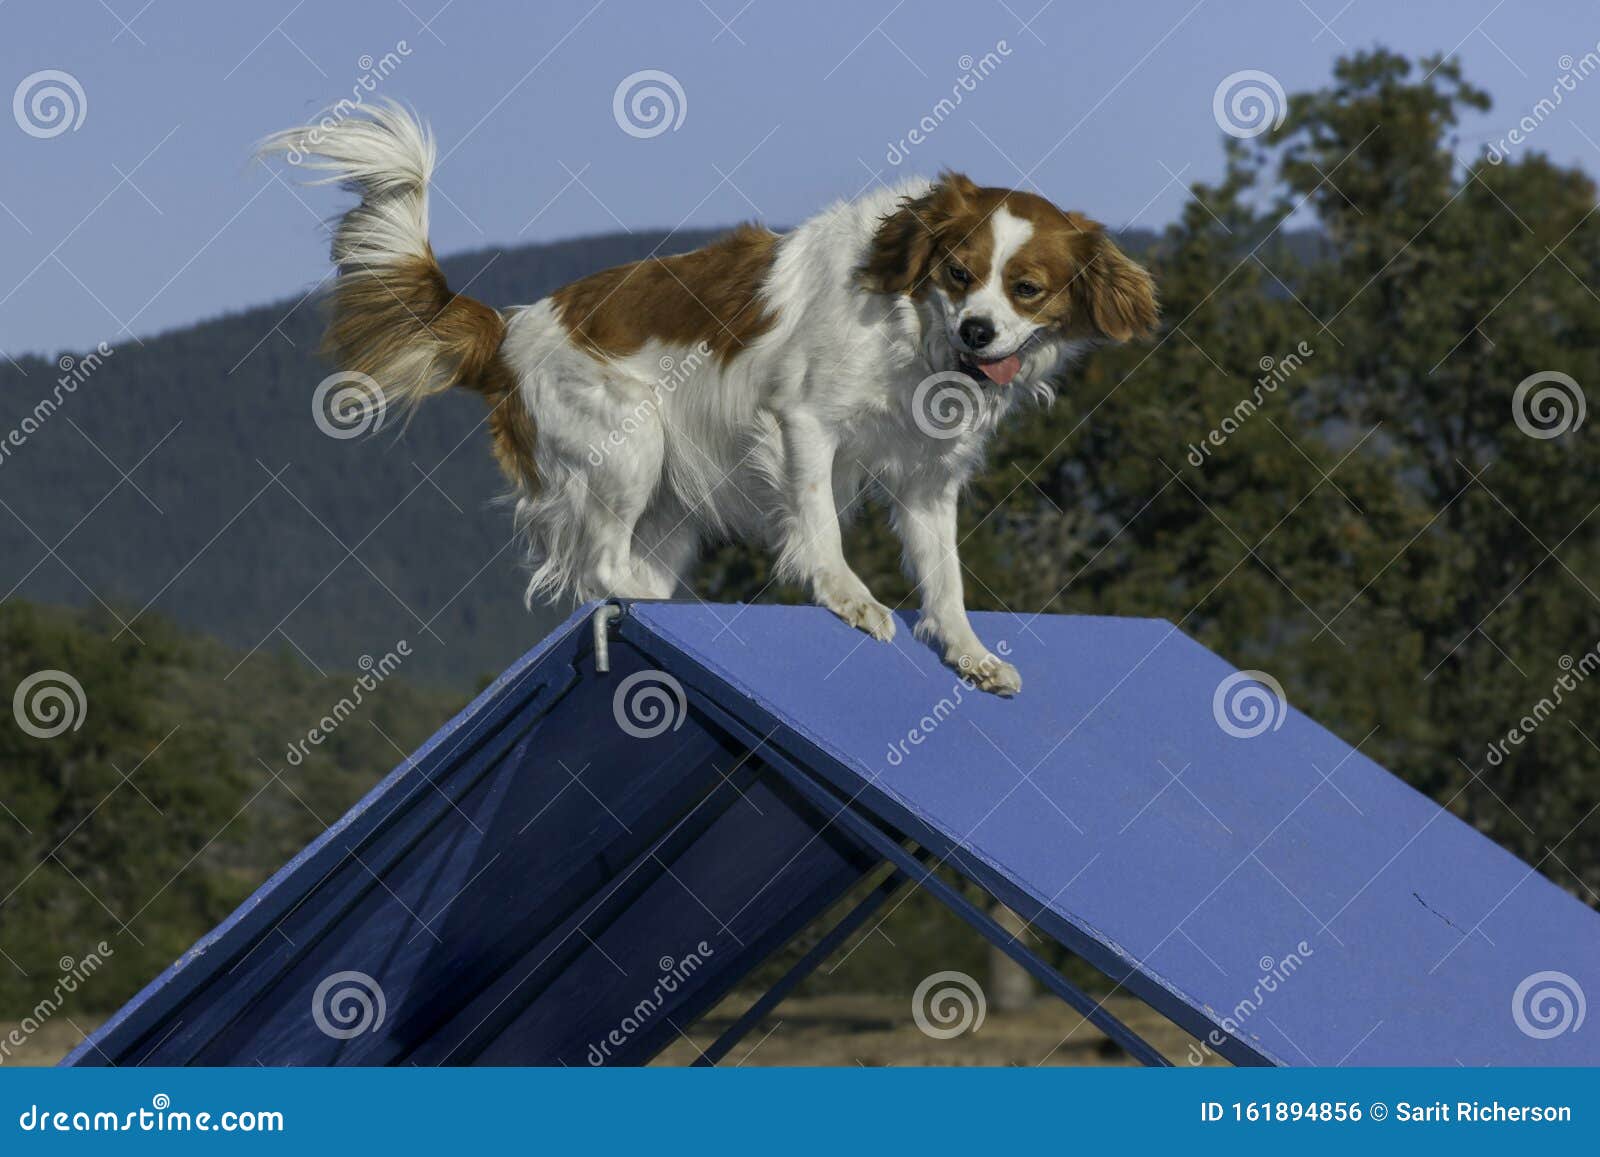 Cavalier King Charles Spaniel At The Top Of A Blue Dog Agility A Frame Stock Photo Image Of Nature Canine 161894856